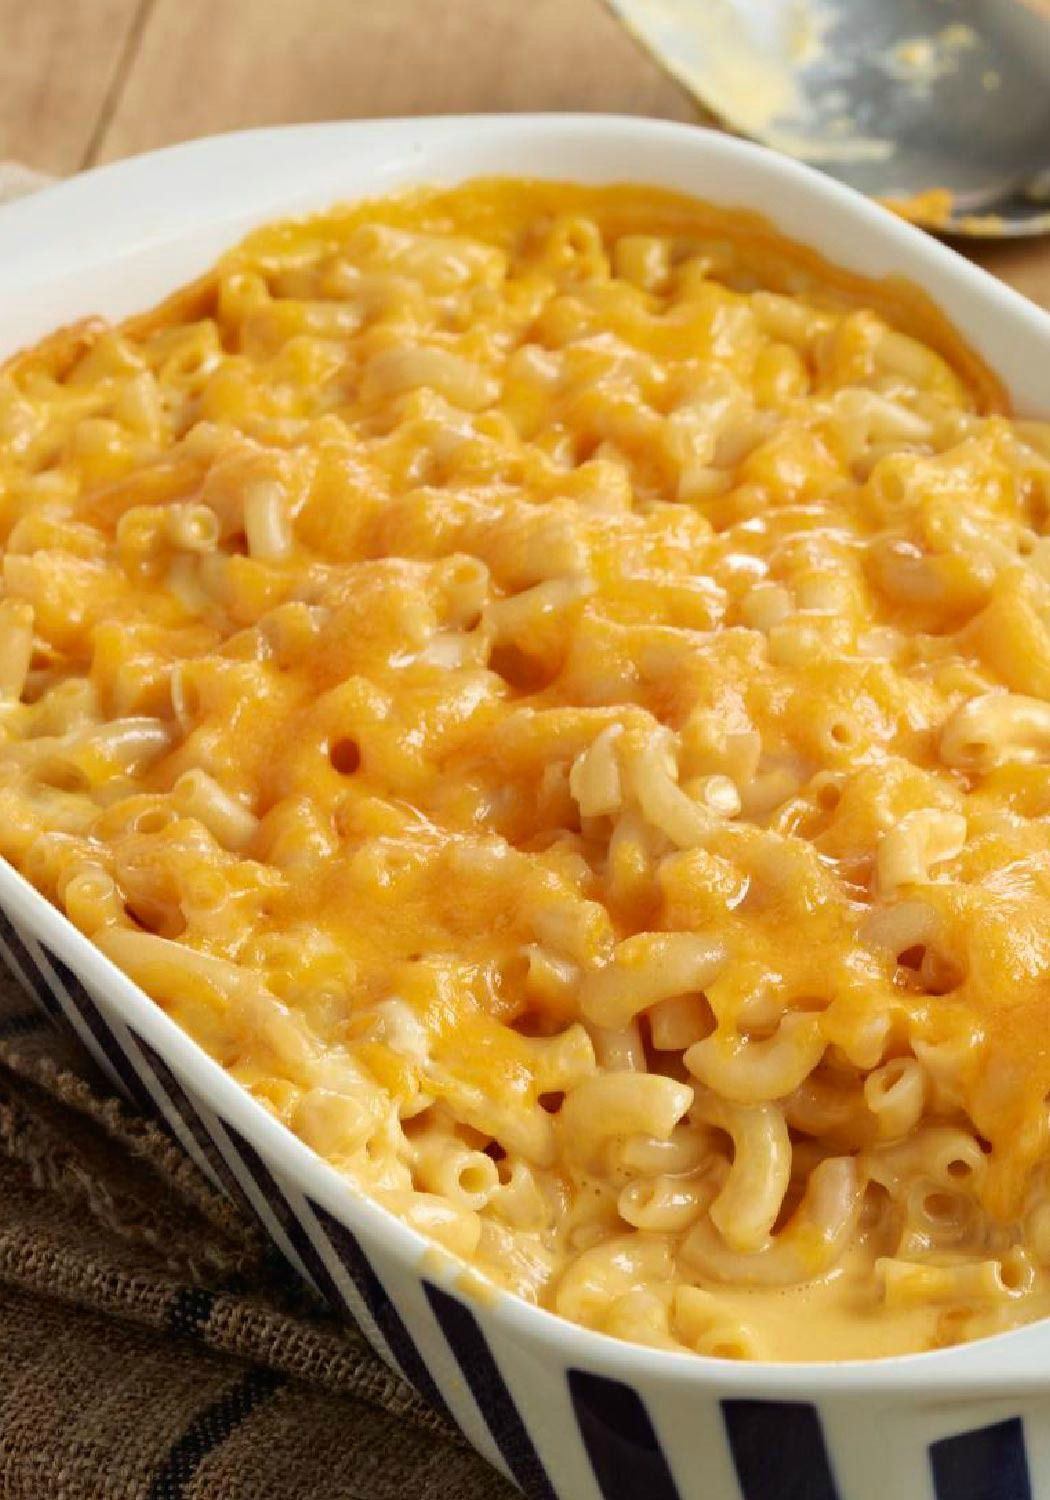 Oven Baked Macaroni And Cheese Recipe
 Super Cheesy Baked Macaroni & Cheese Trust us this